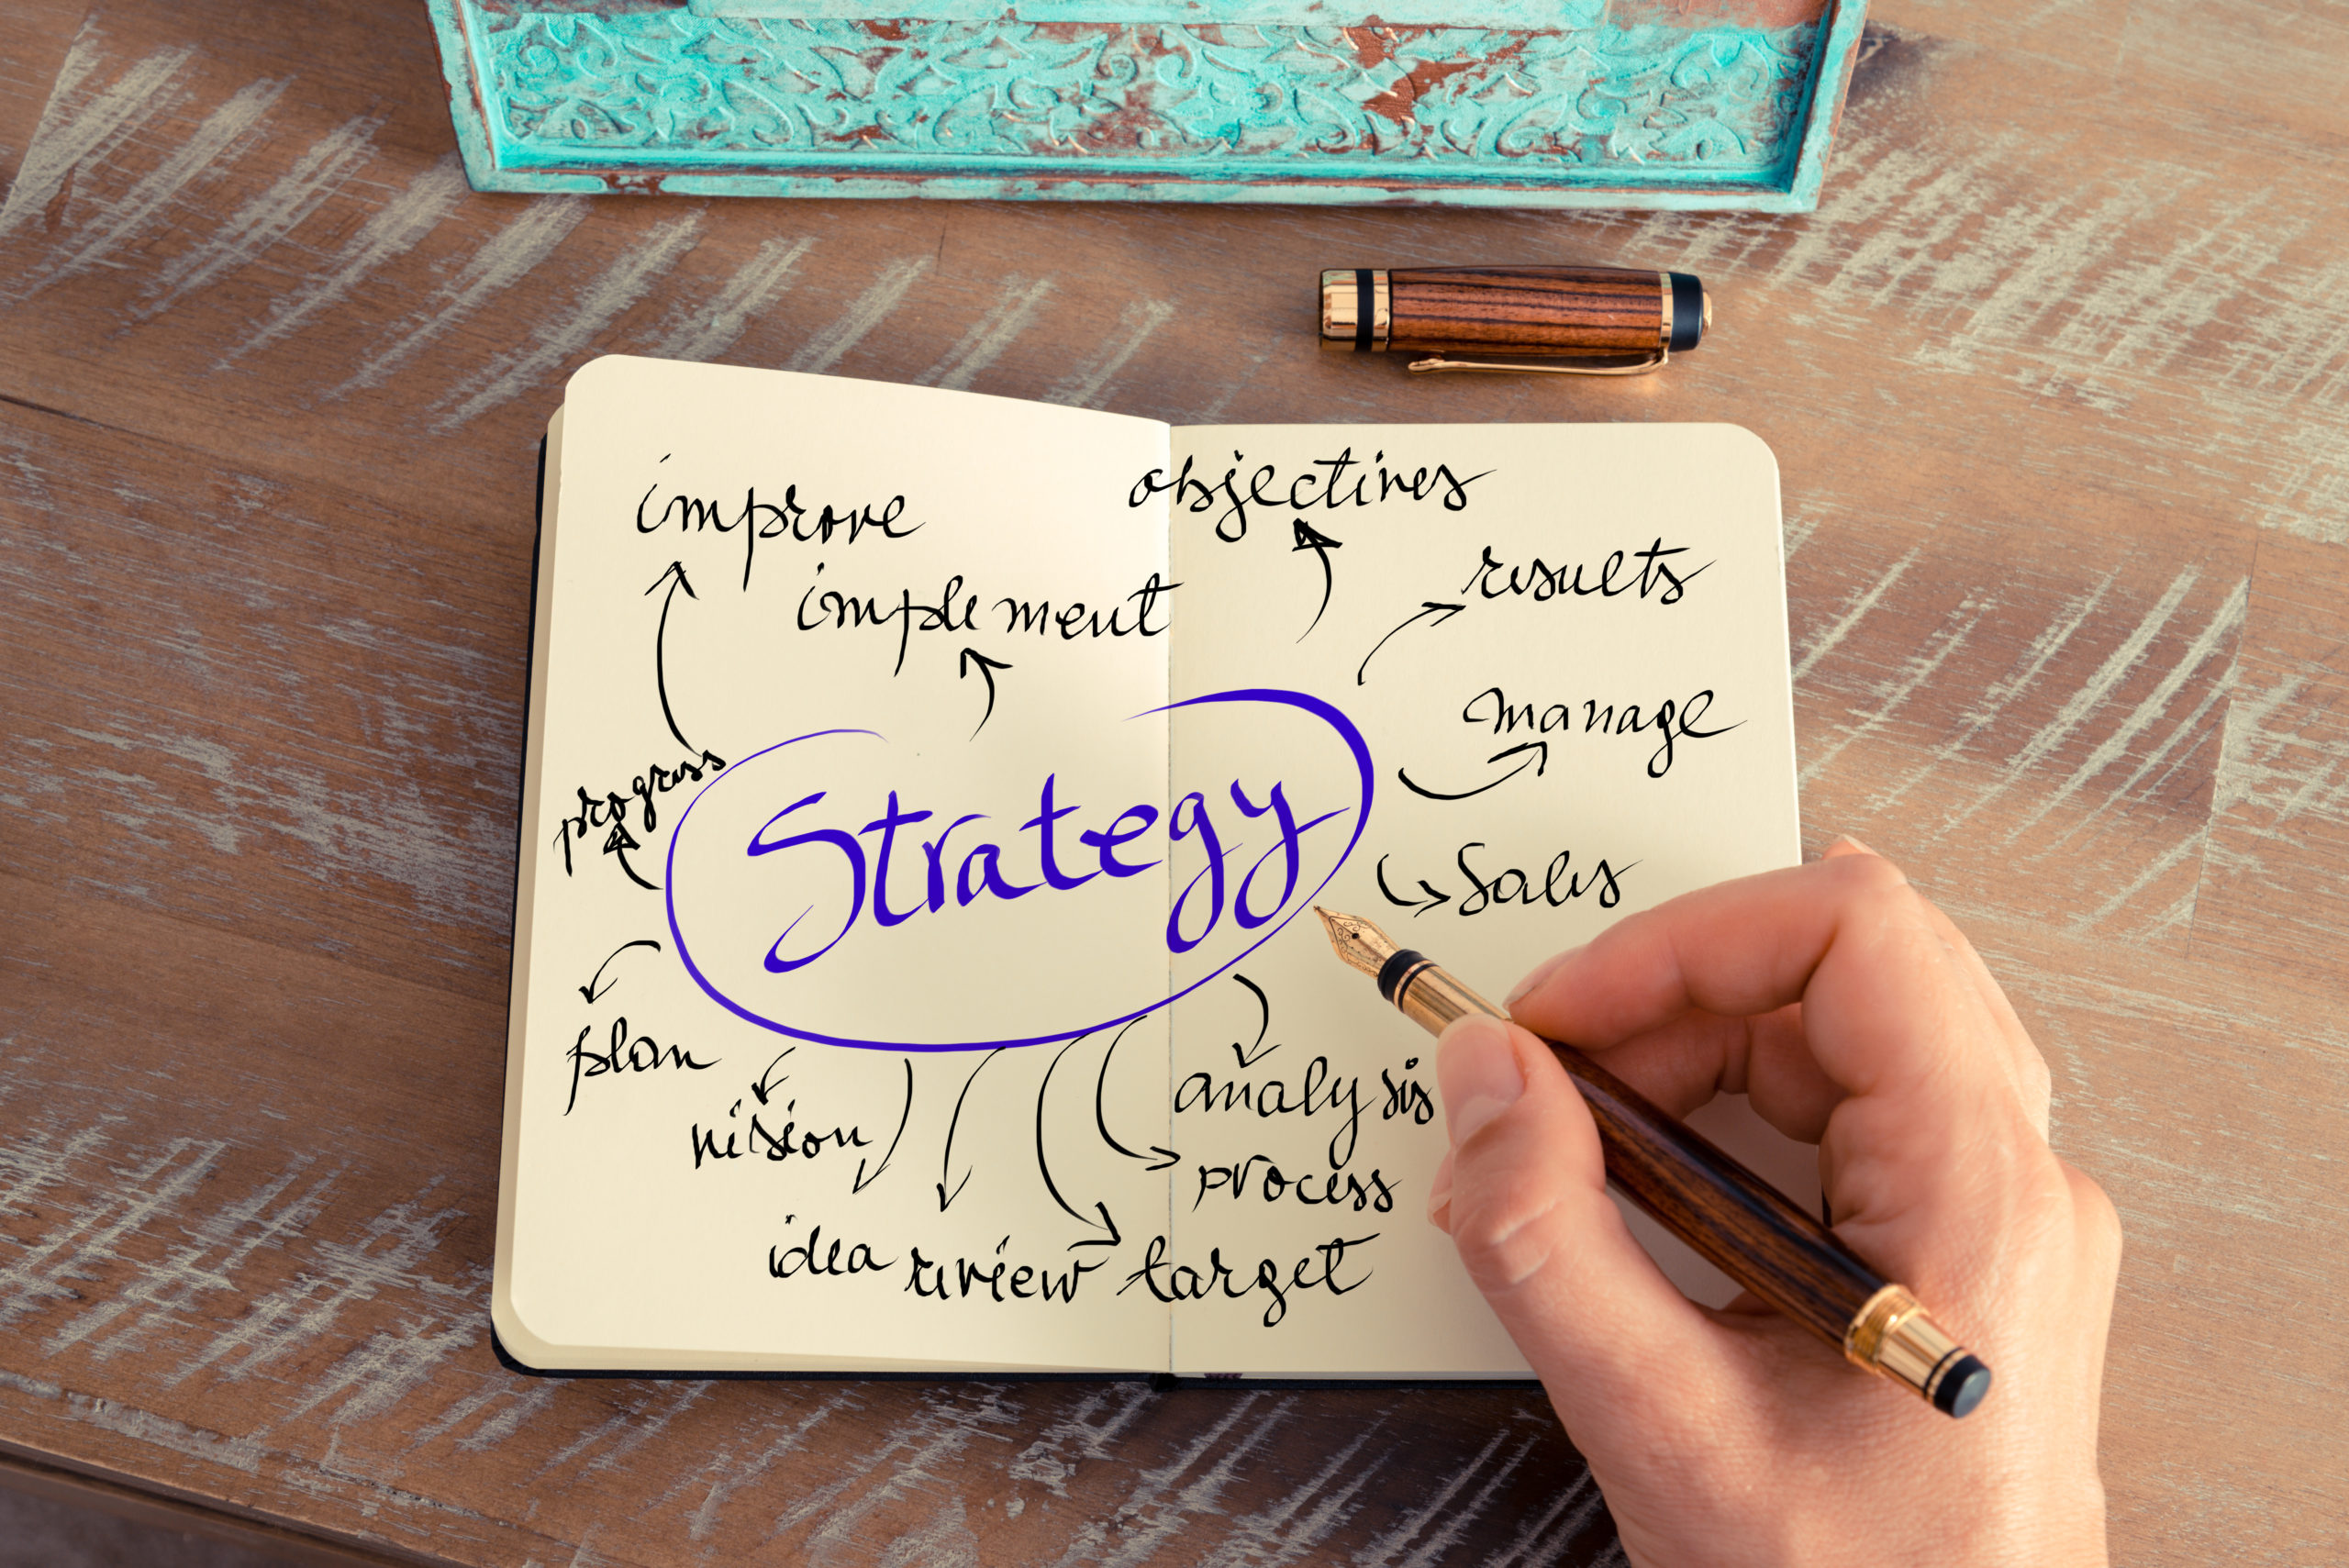 The Basics of Brand Strategy